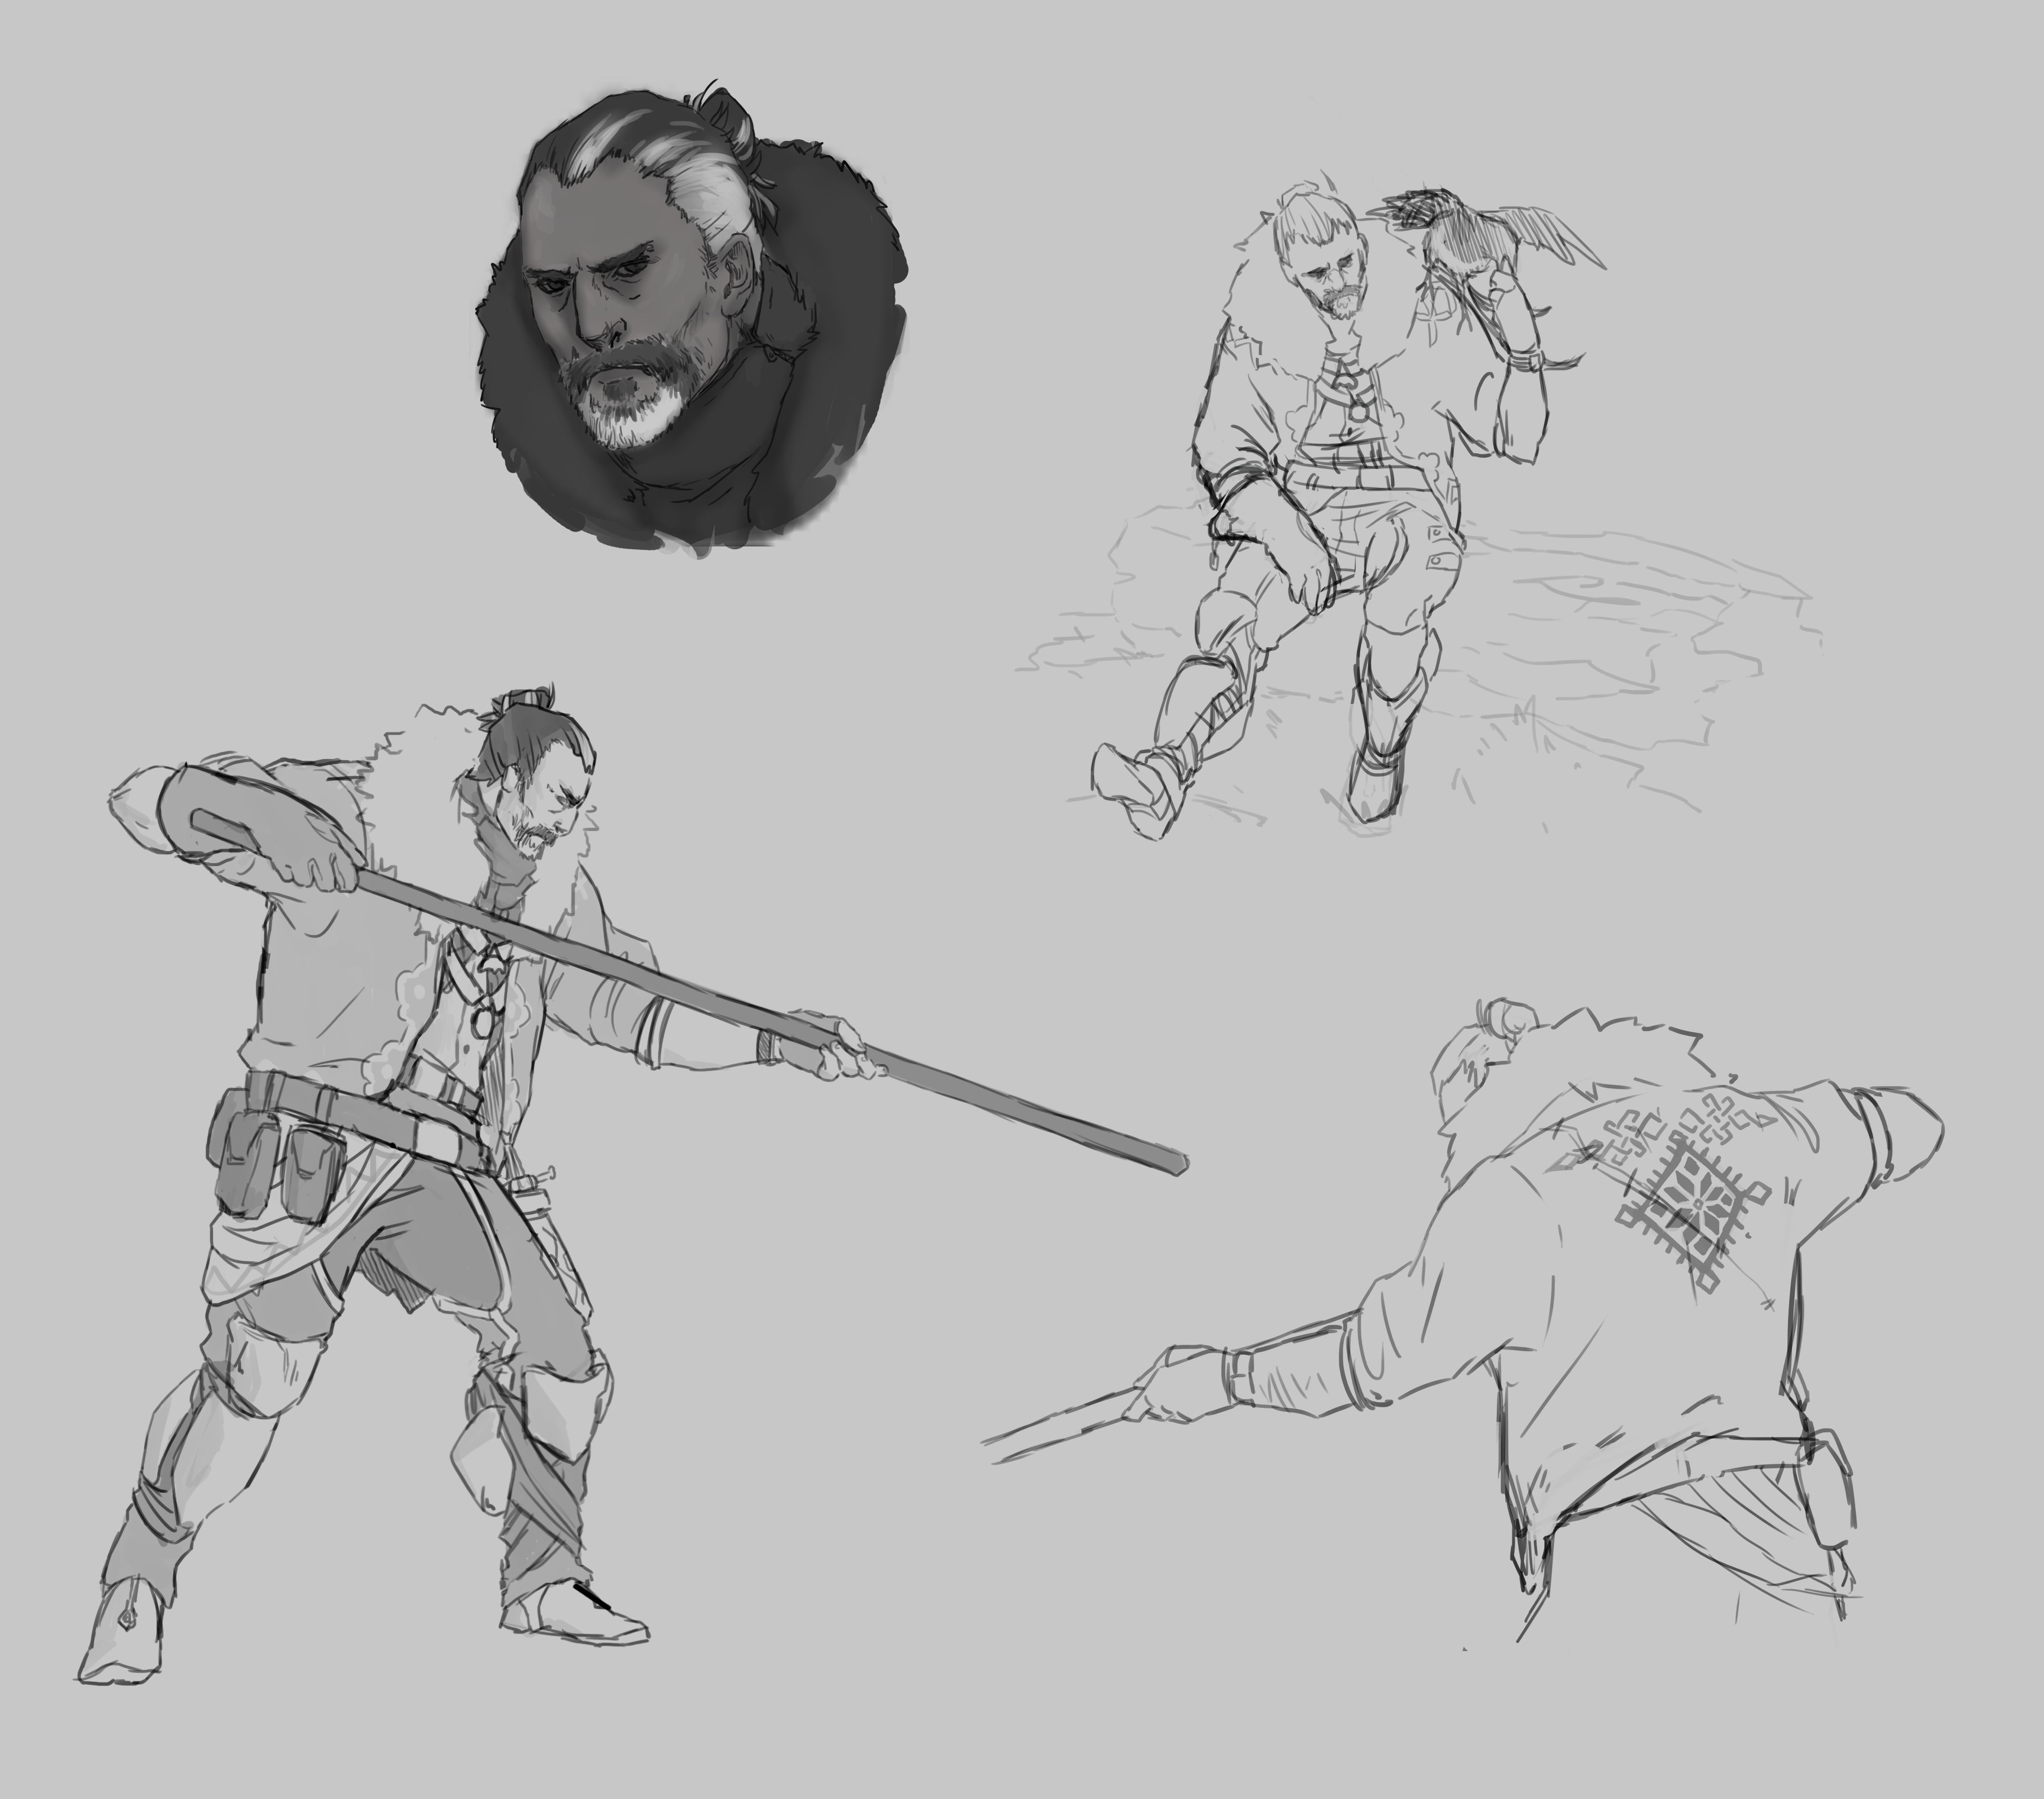 Exploration of Bogdan's early character design